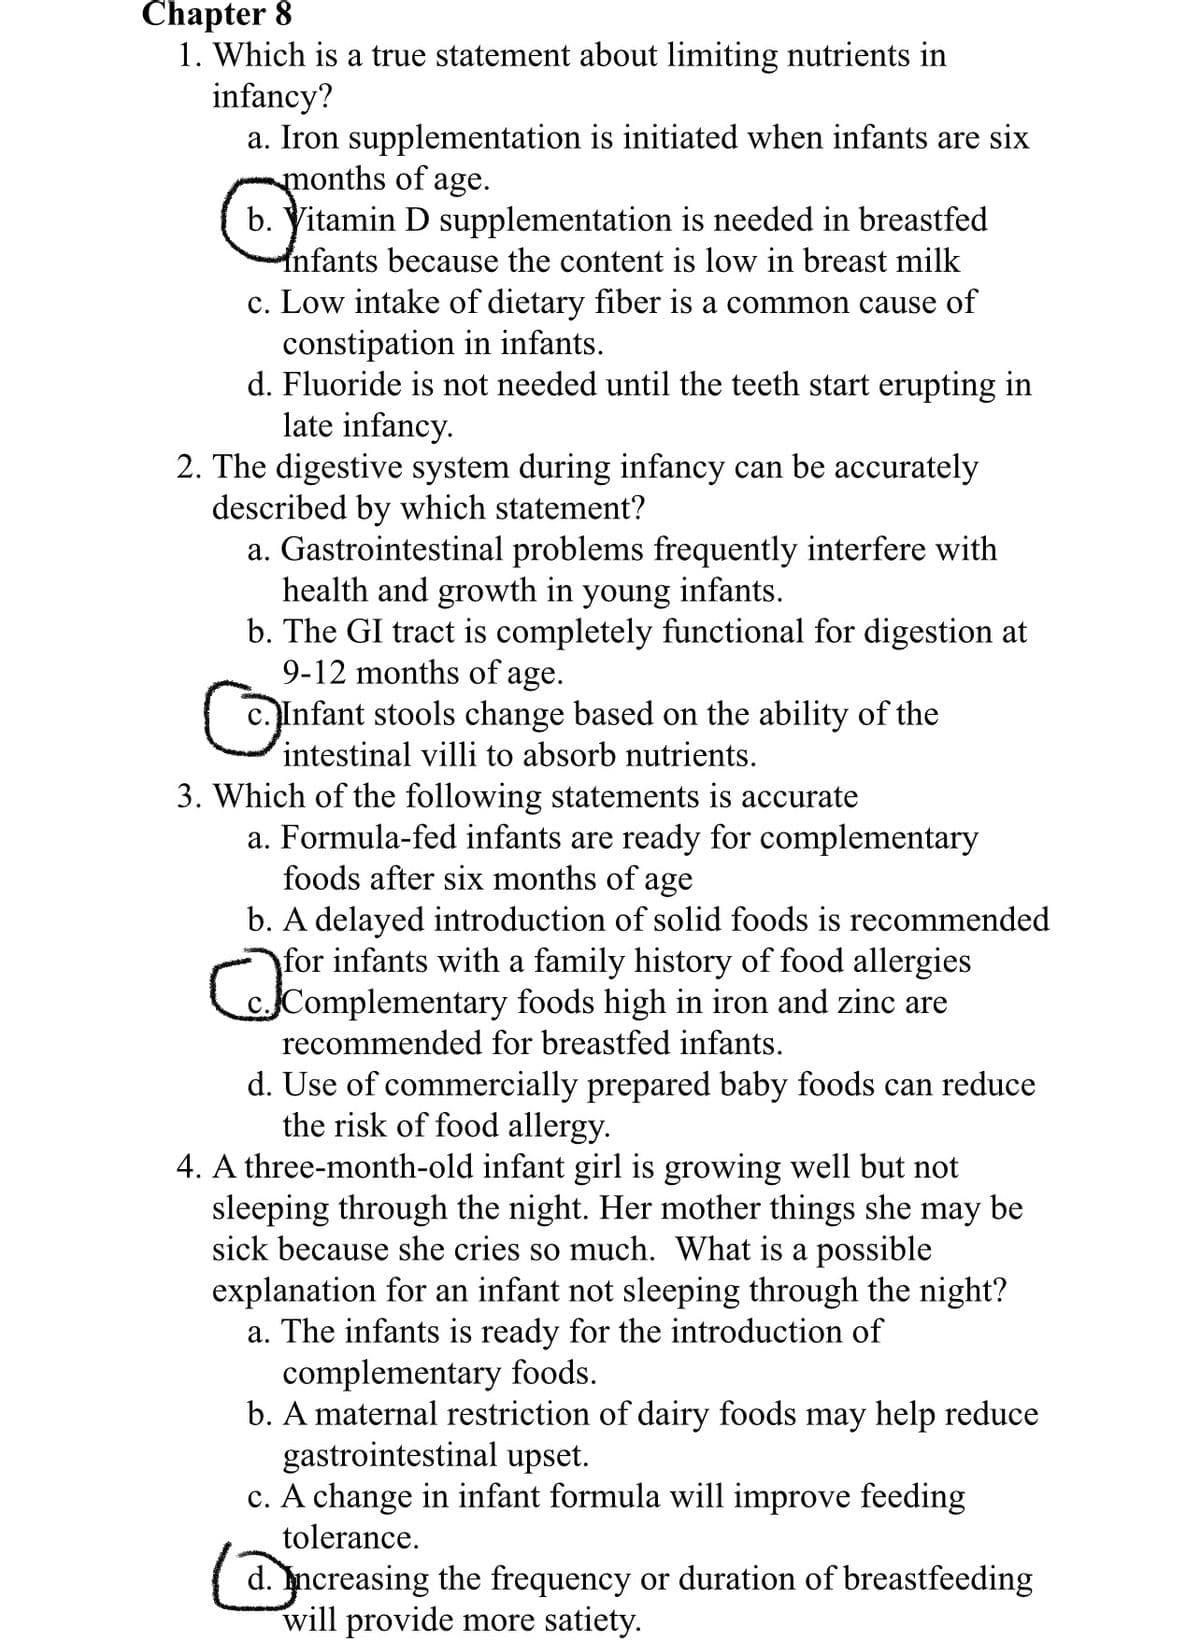 Chapter 8
1. Which is a true statement about limiting nutrients in
infancy?
a. Iron supplementation is initiated when infants are six
months of age.
b. Yitamin D supplementation is needed in breastfed
Infants because the content is low in breast milk
c. Low intake of dietary fiber is a common cause of
constipation in infants.
d. Fluoride is not needed until the teeth start erupting in
late infancy.
2. The digestive system during infancy can be accurately
described by which statement?
a. Gastrointestinal problems frequently interfere with
health and growth in
b. The GI tract is completely functional for digestion at
9-12 months of age.
Infant stools change based on the ability of the
intestinal villi to absorb nutrients.
young
infants.
3. Which of the following statements is accurate
a. Formula-fed infants are ready for complementary
foods after six months of age
b. A delayed introduction of solid foods is recommended
for infants with a family history of food allergies
cComplementary foods high in iron and zinc are
recommended for breastfed infants.
d. Use of commercially prepared baby foods can reduce
the risk of food allergy.
4. A three-month-old infant girl is growing well but not
sleeping through the night. Her mother things she may be
sick because she cries so much. What is a possible
explanation for an infant not sleeping through the night?
a. The infants is ready for the introduction of
complementary foods.
b. A maternal restriction of dairy foods may help reduce
gastrointestinal upset.
c. A change in infant formula will improve feeding
tolerance.
d. Increasing the frequency or duration of breastfeeding
will provide more satiety.
